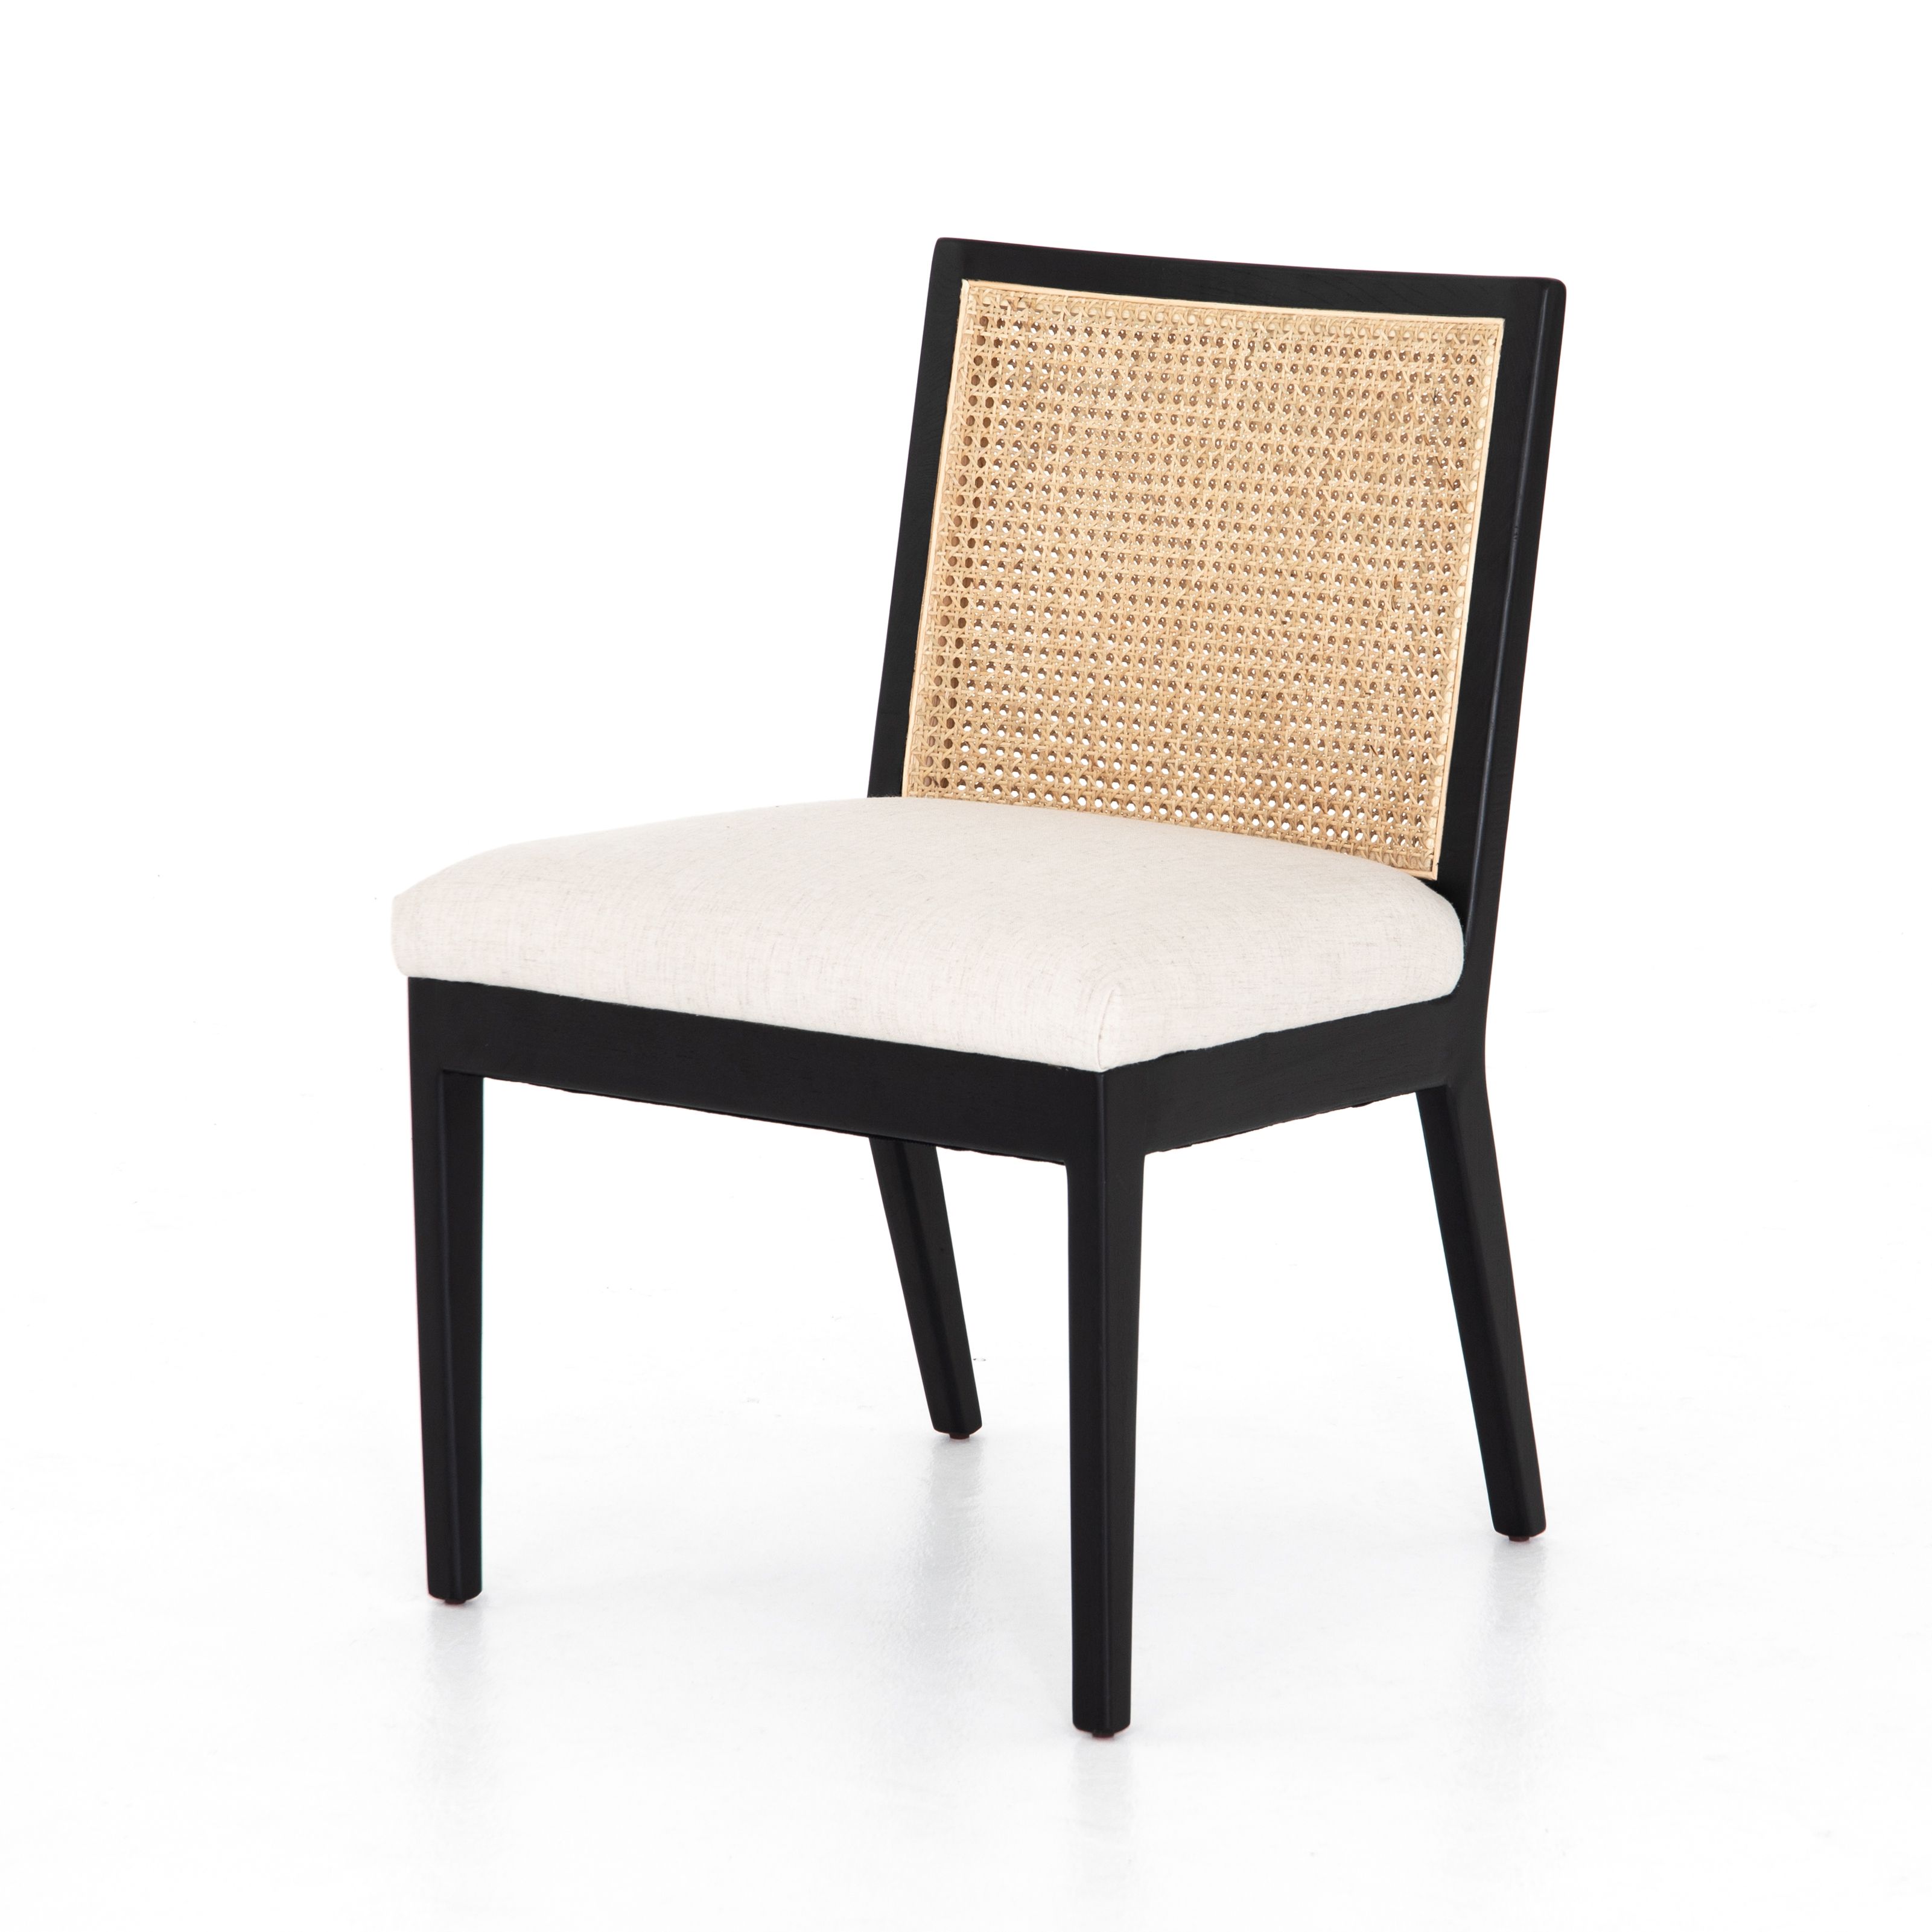 Antonia Cane Armless Dining Chair | Scout & Nimble